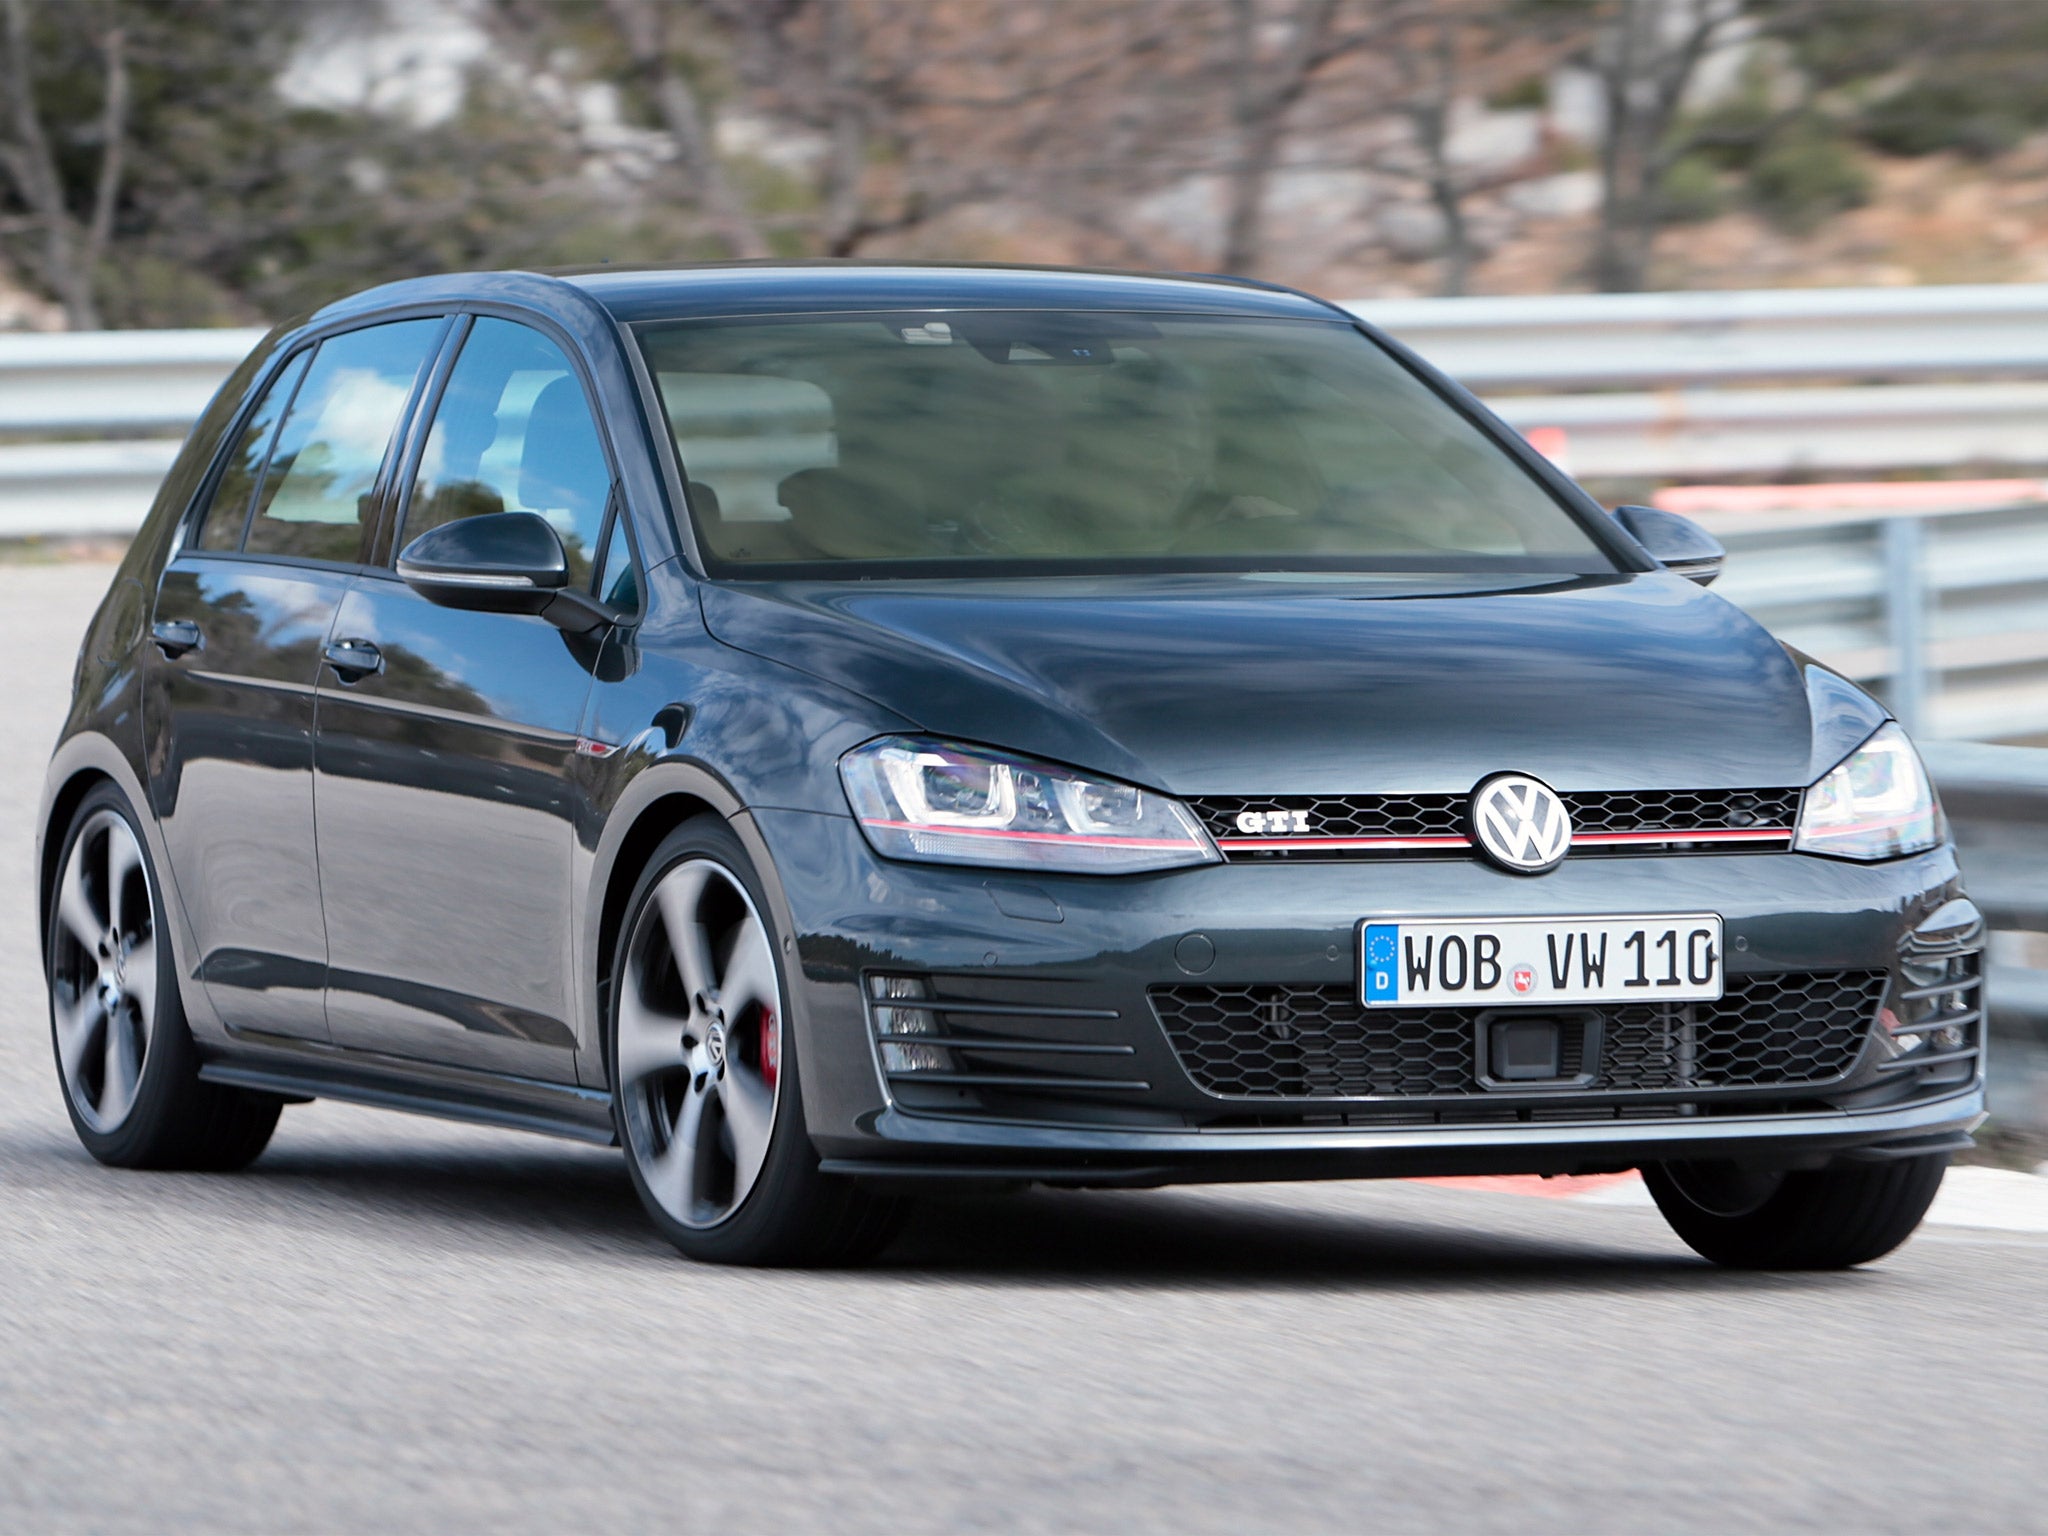 Motoring review: Volkswagen Golf GTI, The Independent